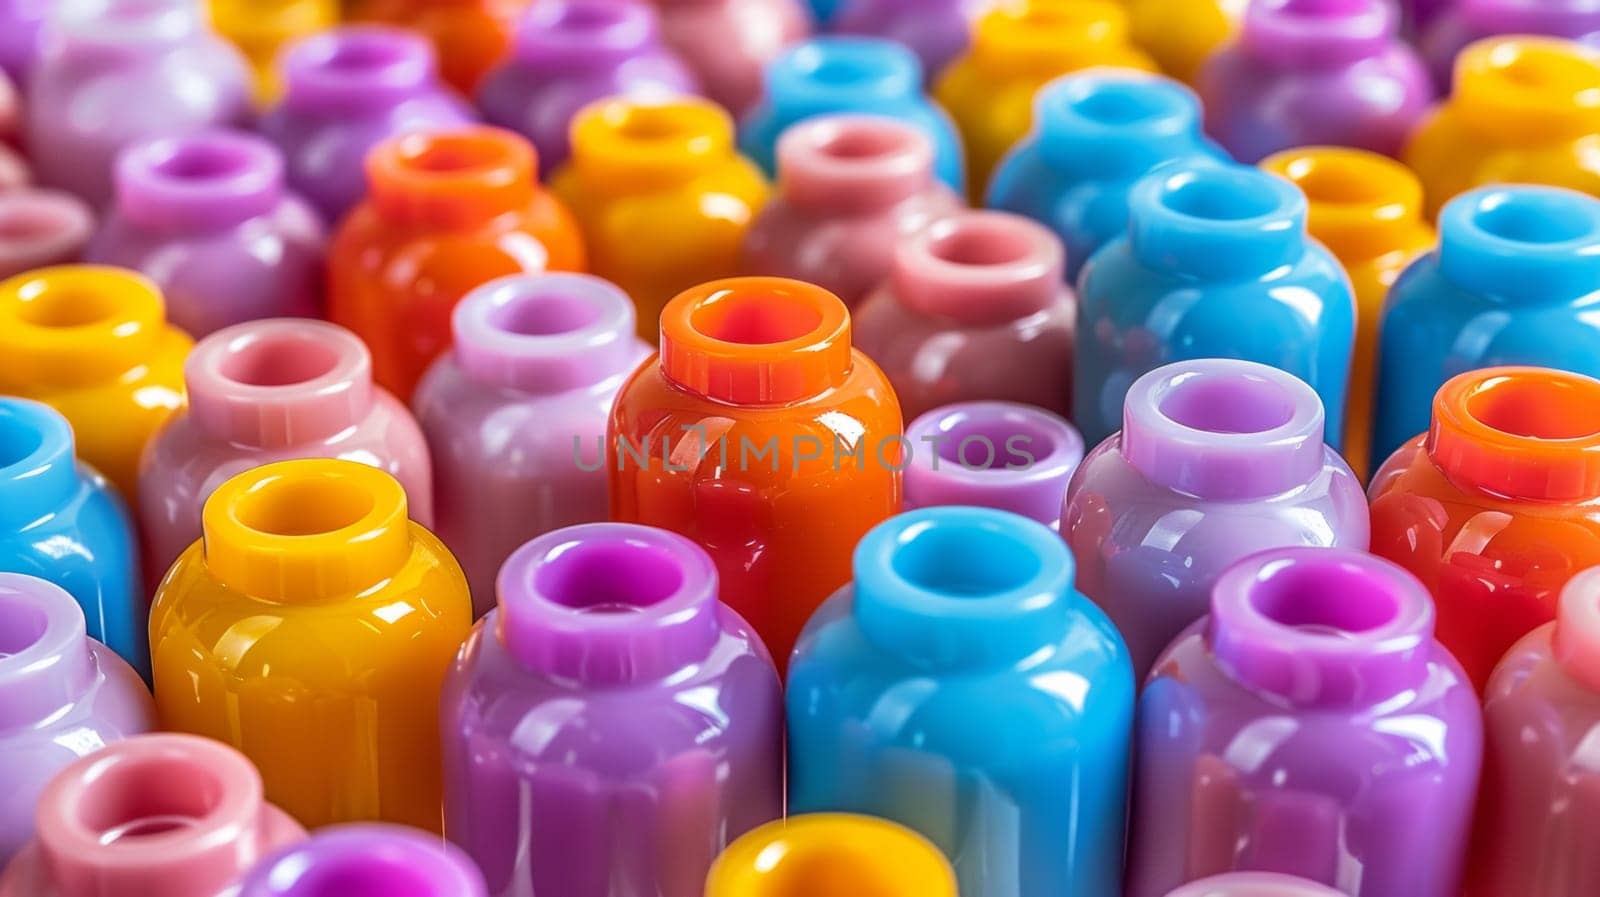 A close up of a bunch of colorful plastic bottles